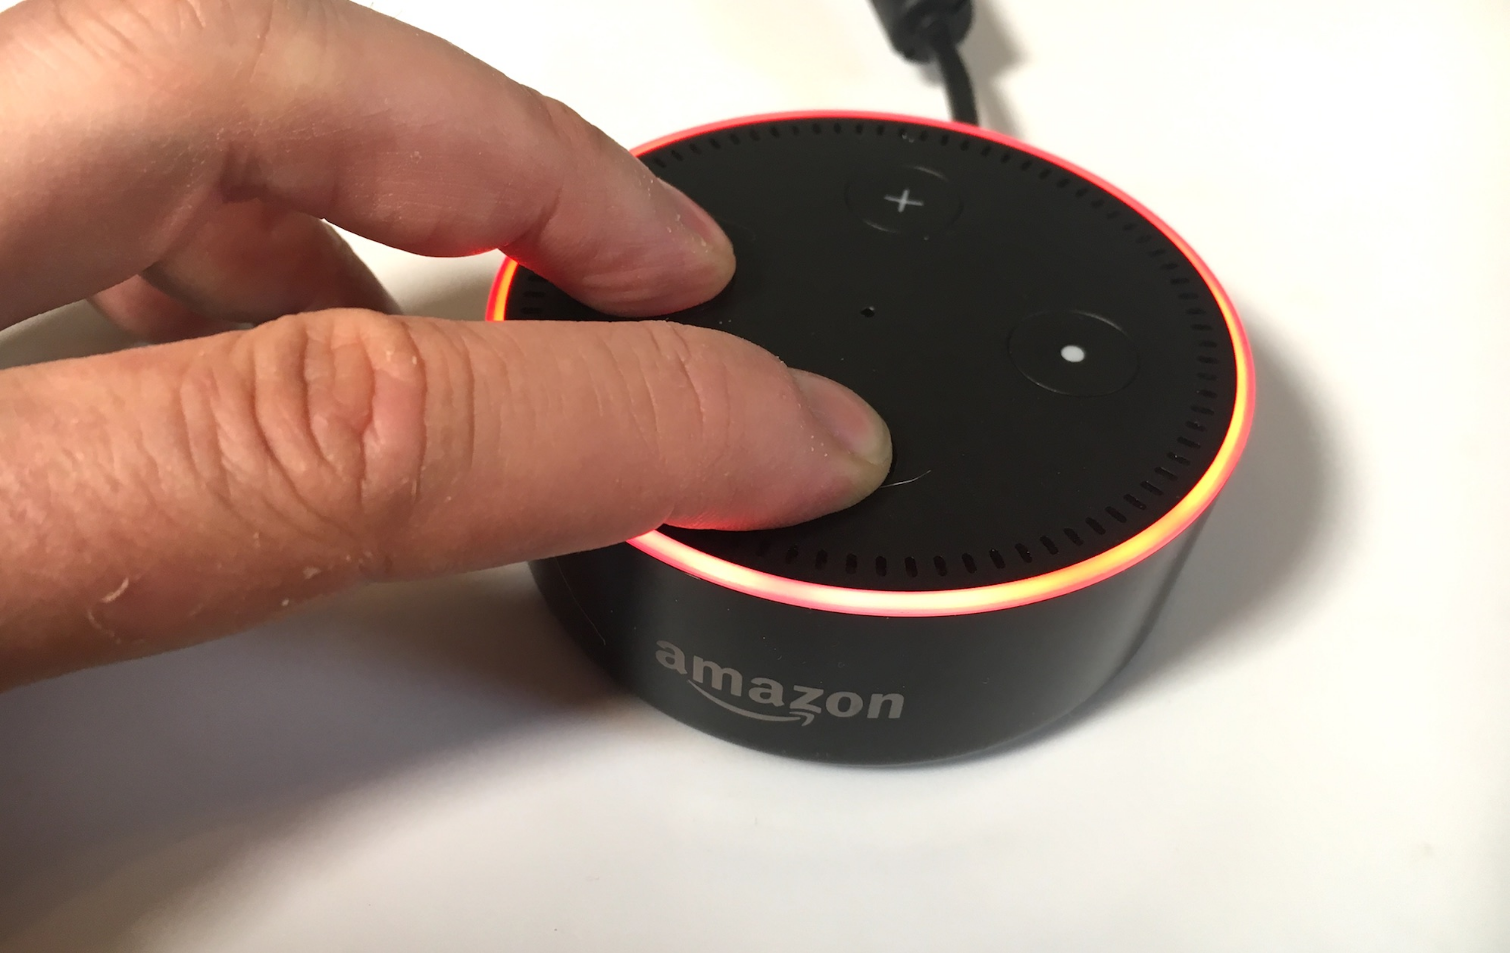 How to Reset an Alexa Device